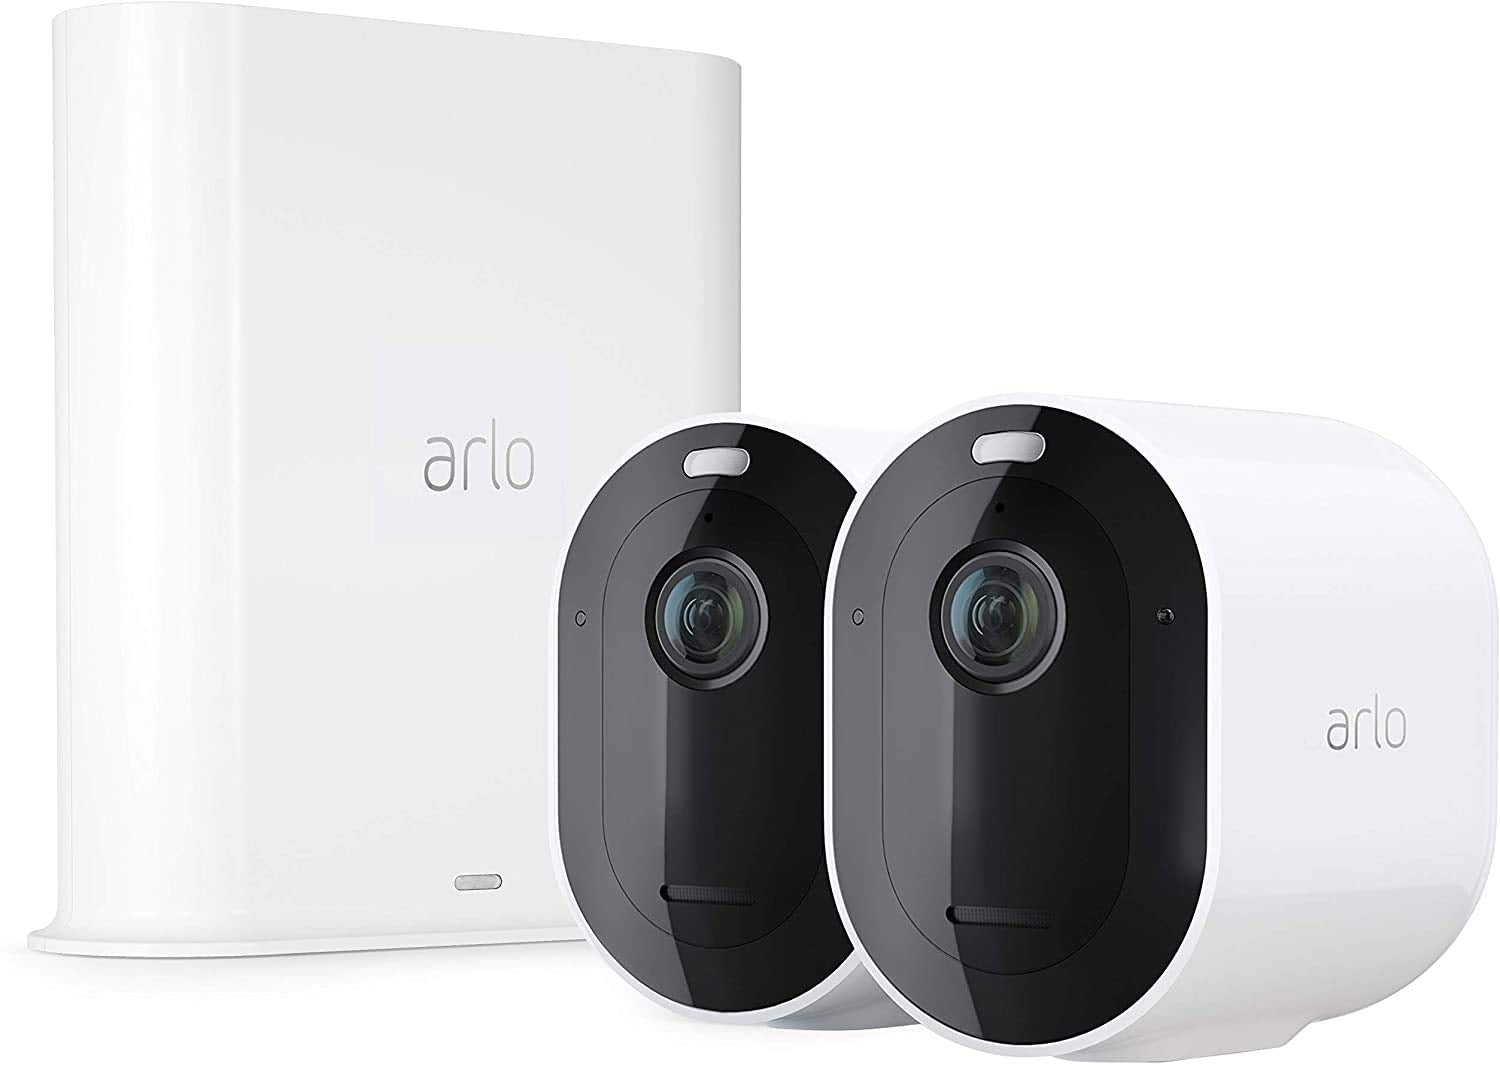 Arlo Pro3 Wireless Outdoor Home Security Camera System CCTV, 6-Month Battery, Colour Night Vision, 2K HDR, 2-Way Audio, Alarm, 2 Camera kit, With 90-day free trial of Arlo Secure Plan, White